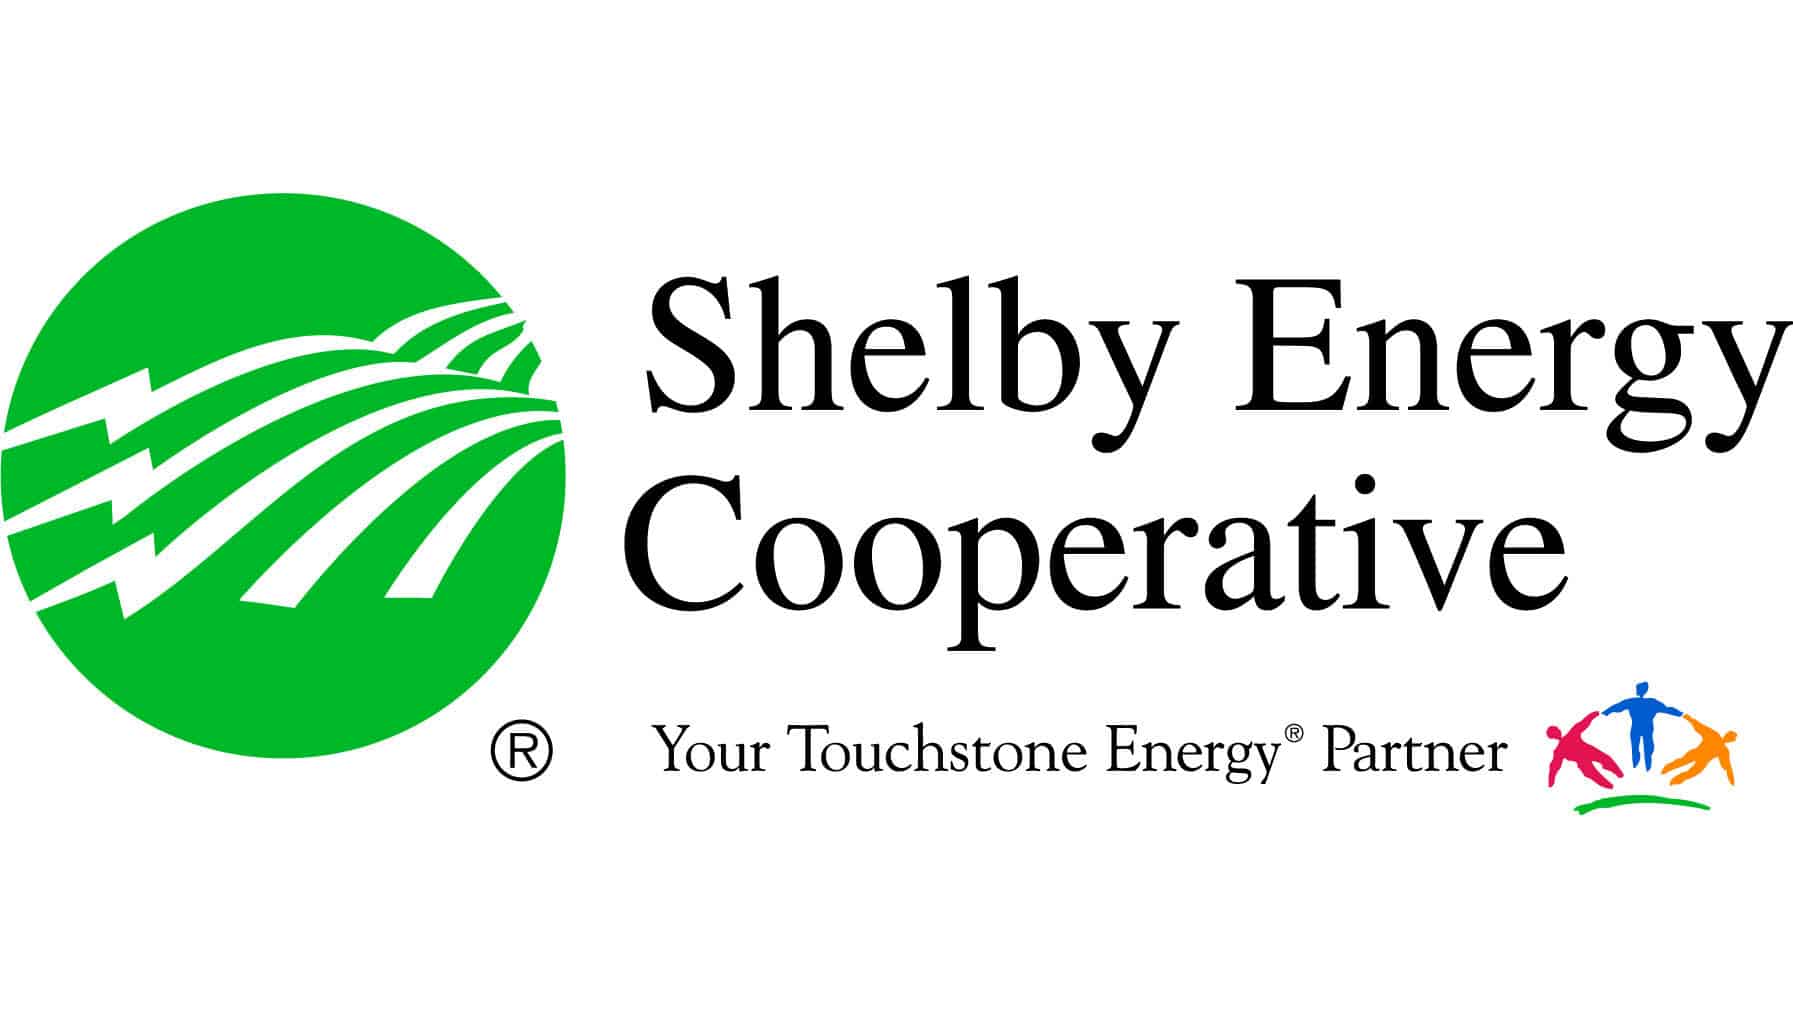 shelby-energy-annual-meeting-kentucky-electric-cooperatives